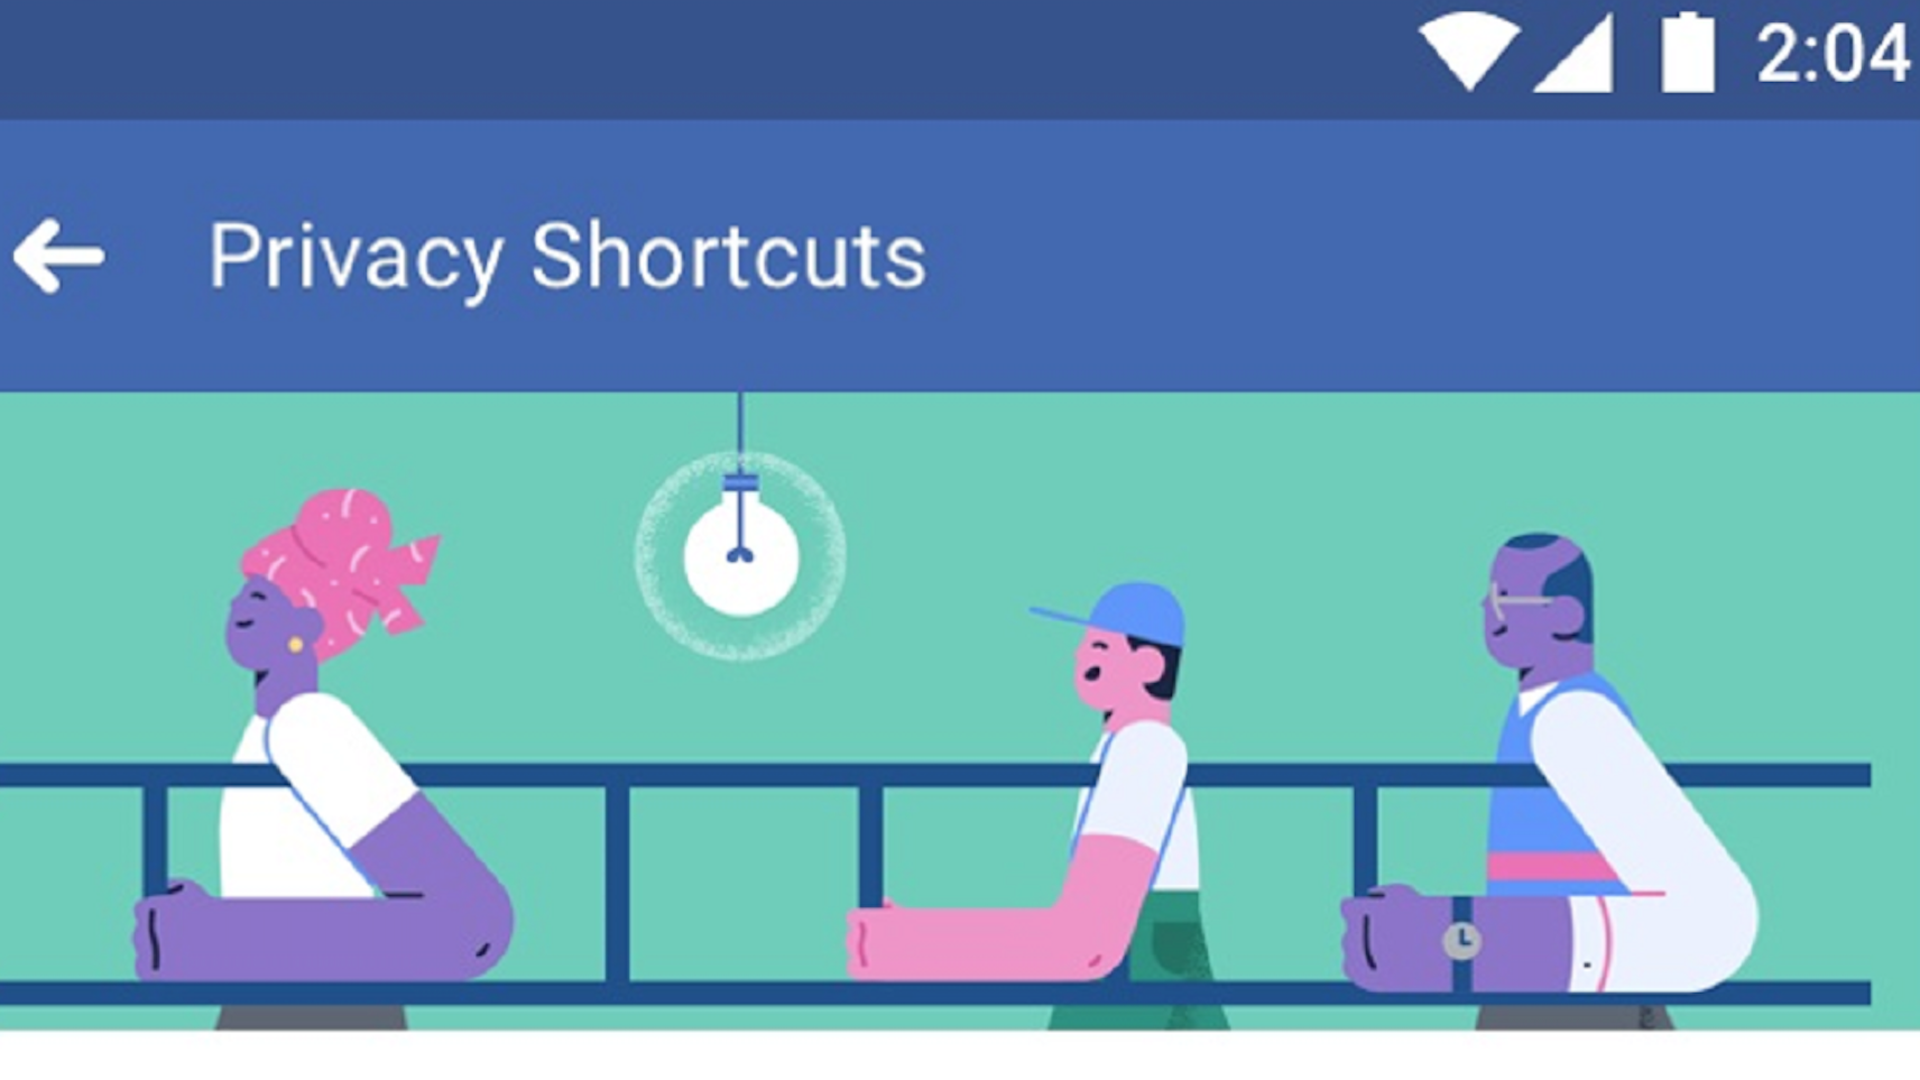 Facebook's new privacy controls